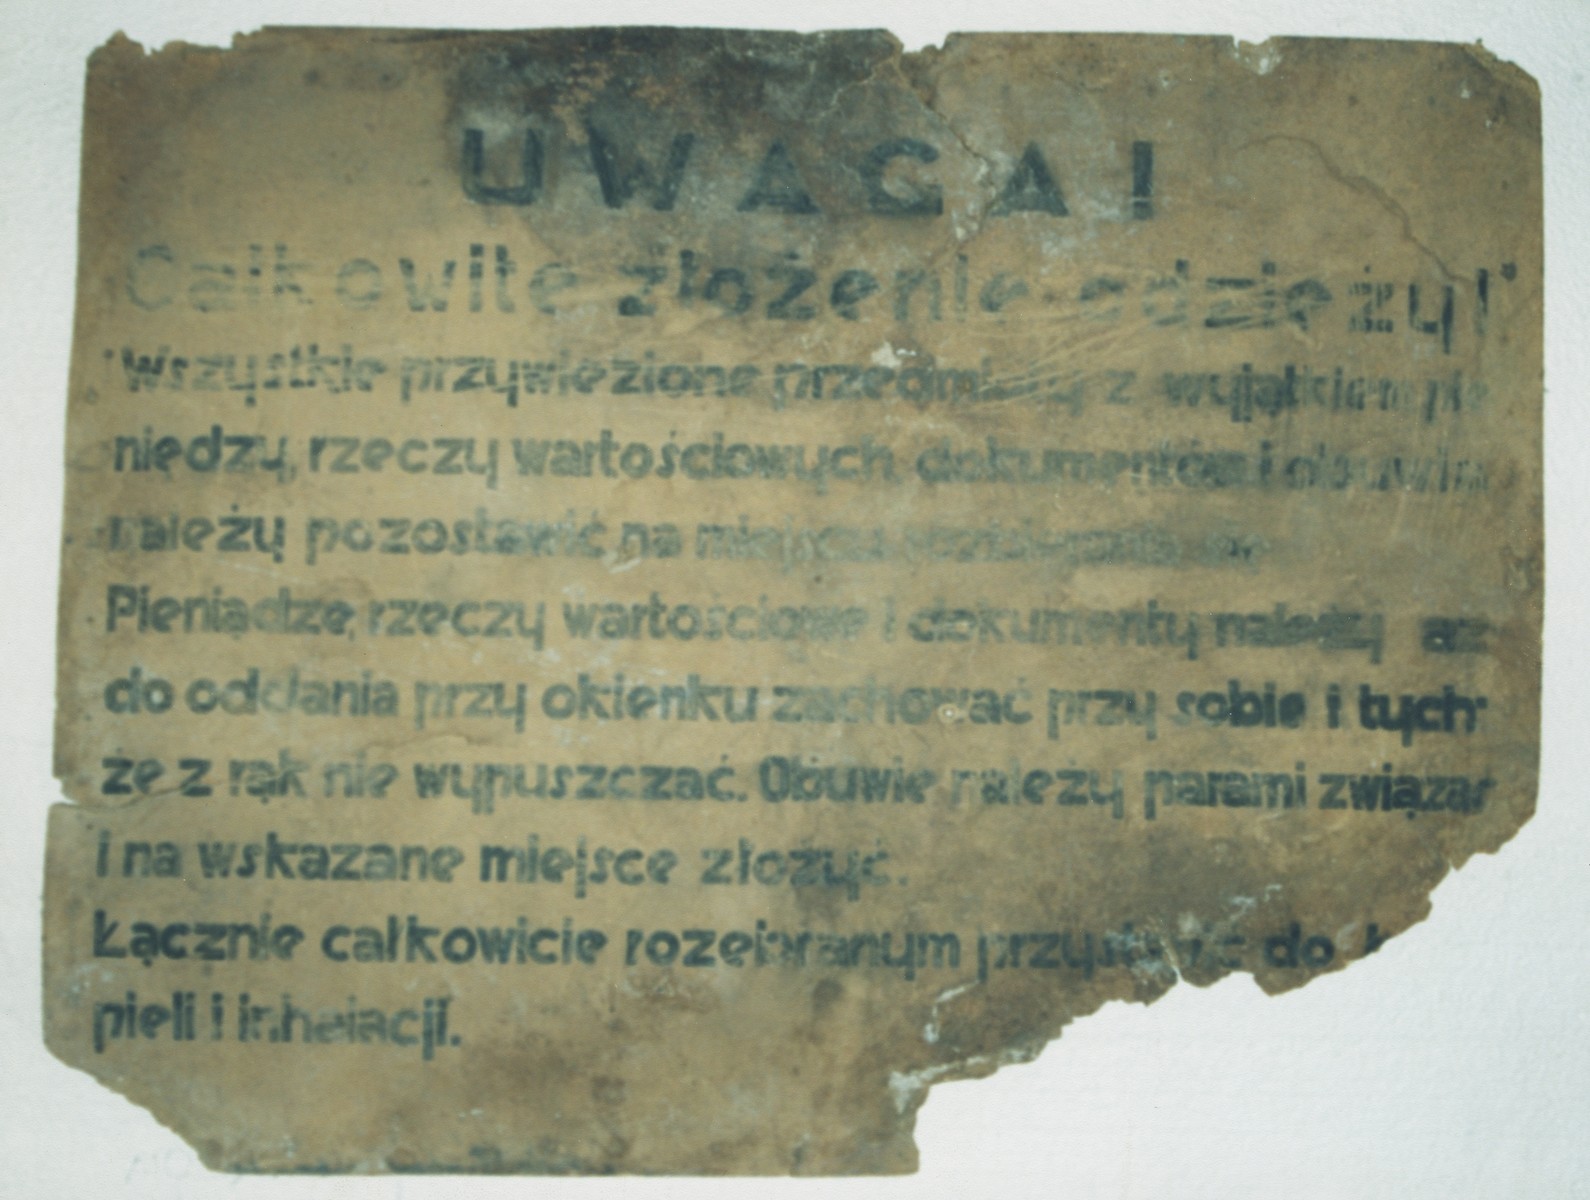 A sign in Polish from the Belzec killing center that reads, "Attention!  All belongings must be handed in at the counter except for money, documents and other valuables, which you must keep with you.  Shoes should be tied together in pairs and placed in the area marked for shoes.  Afterward, one must go completely naked to the showers."